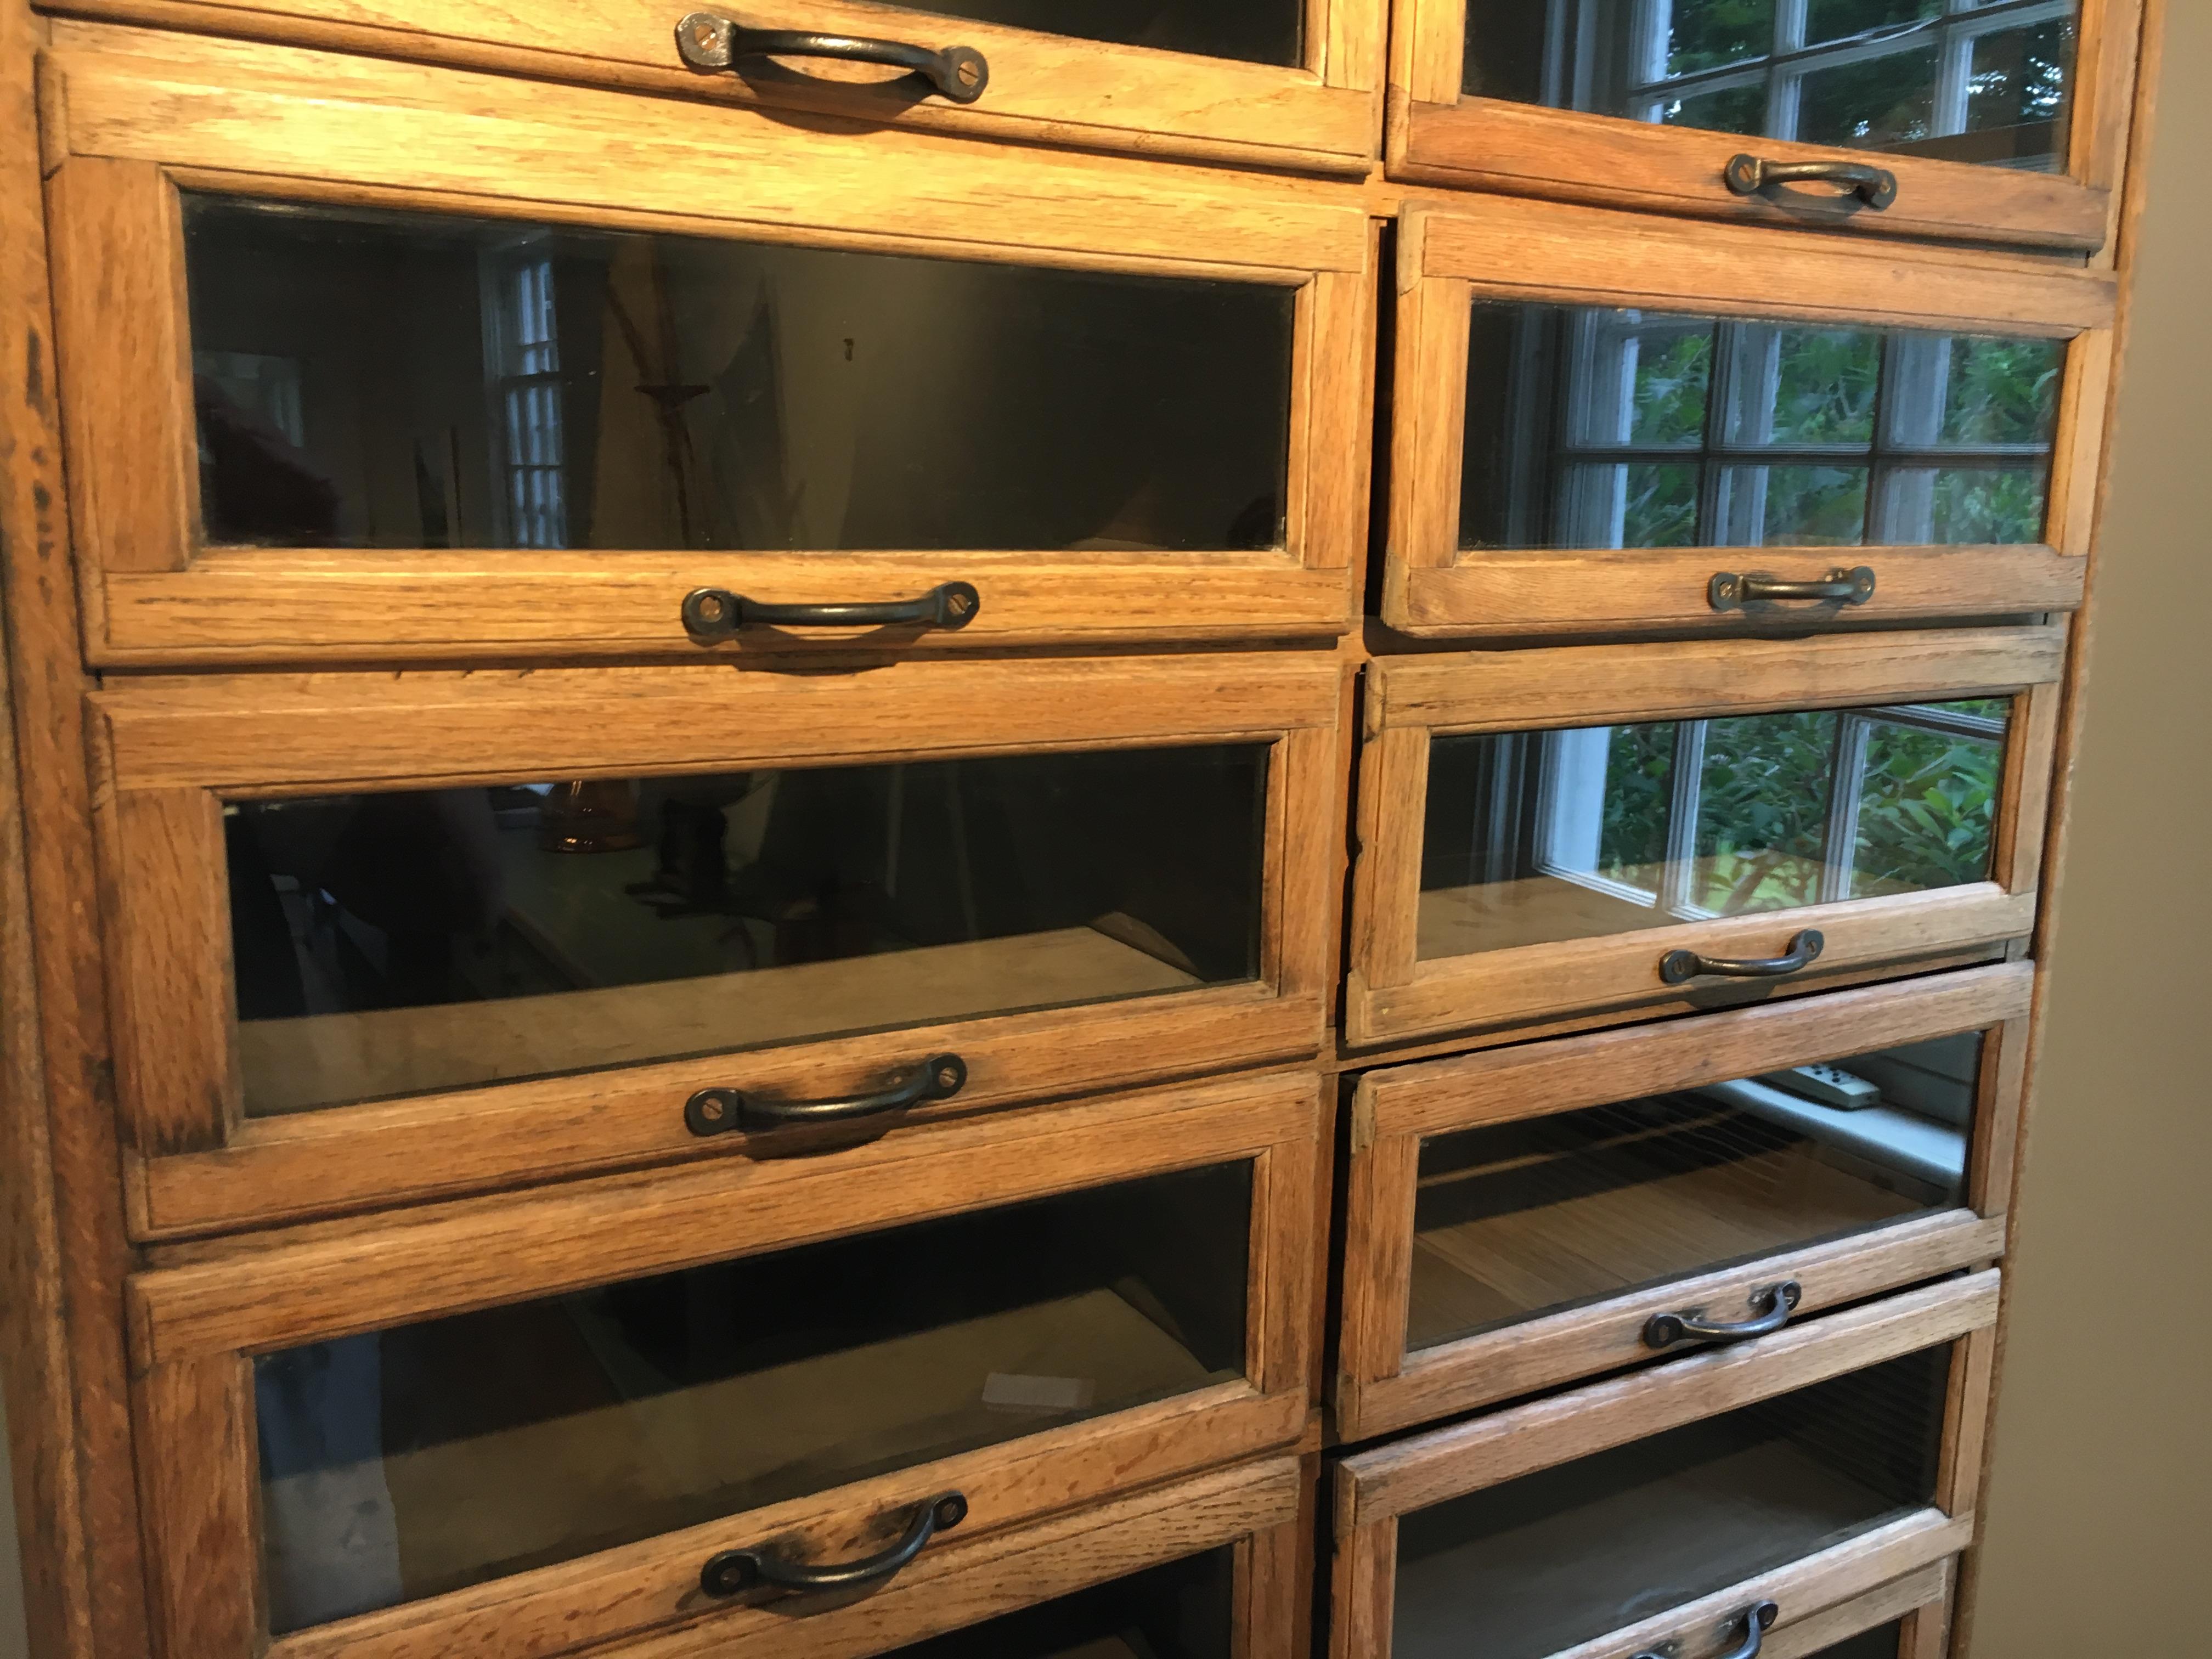 Direct from a men’s and women’s clothing store in London, we love haberdasher’s cabinets in your bedroom. All the drawers work perfectly with original handles. It’s a beauty!